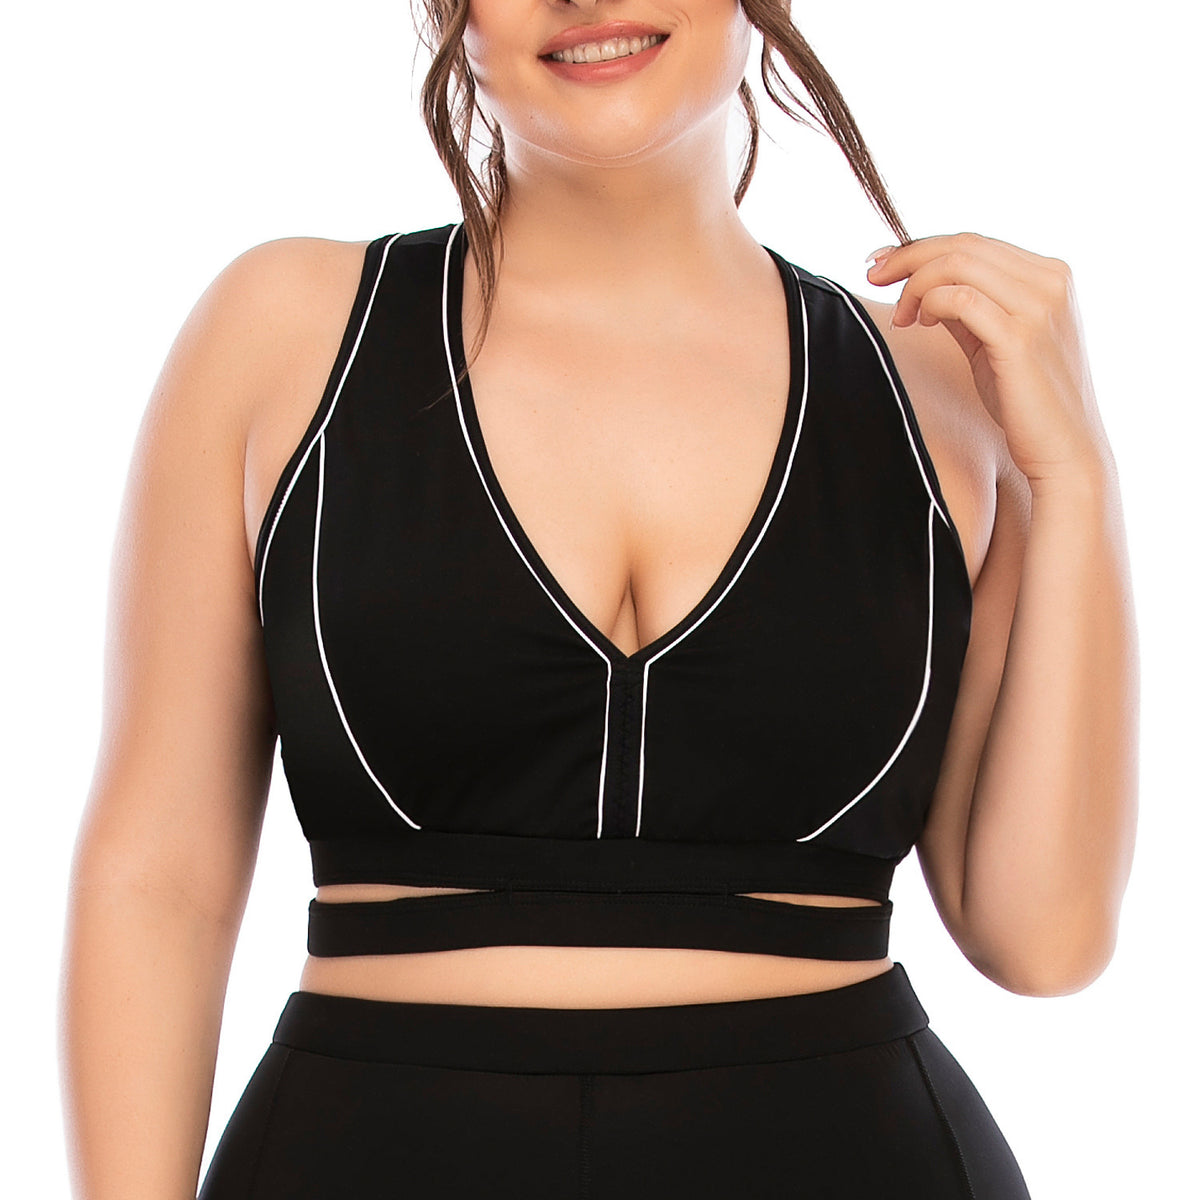 Workout Suits Plus Size Yoga Clothes - High Impact Coffee